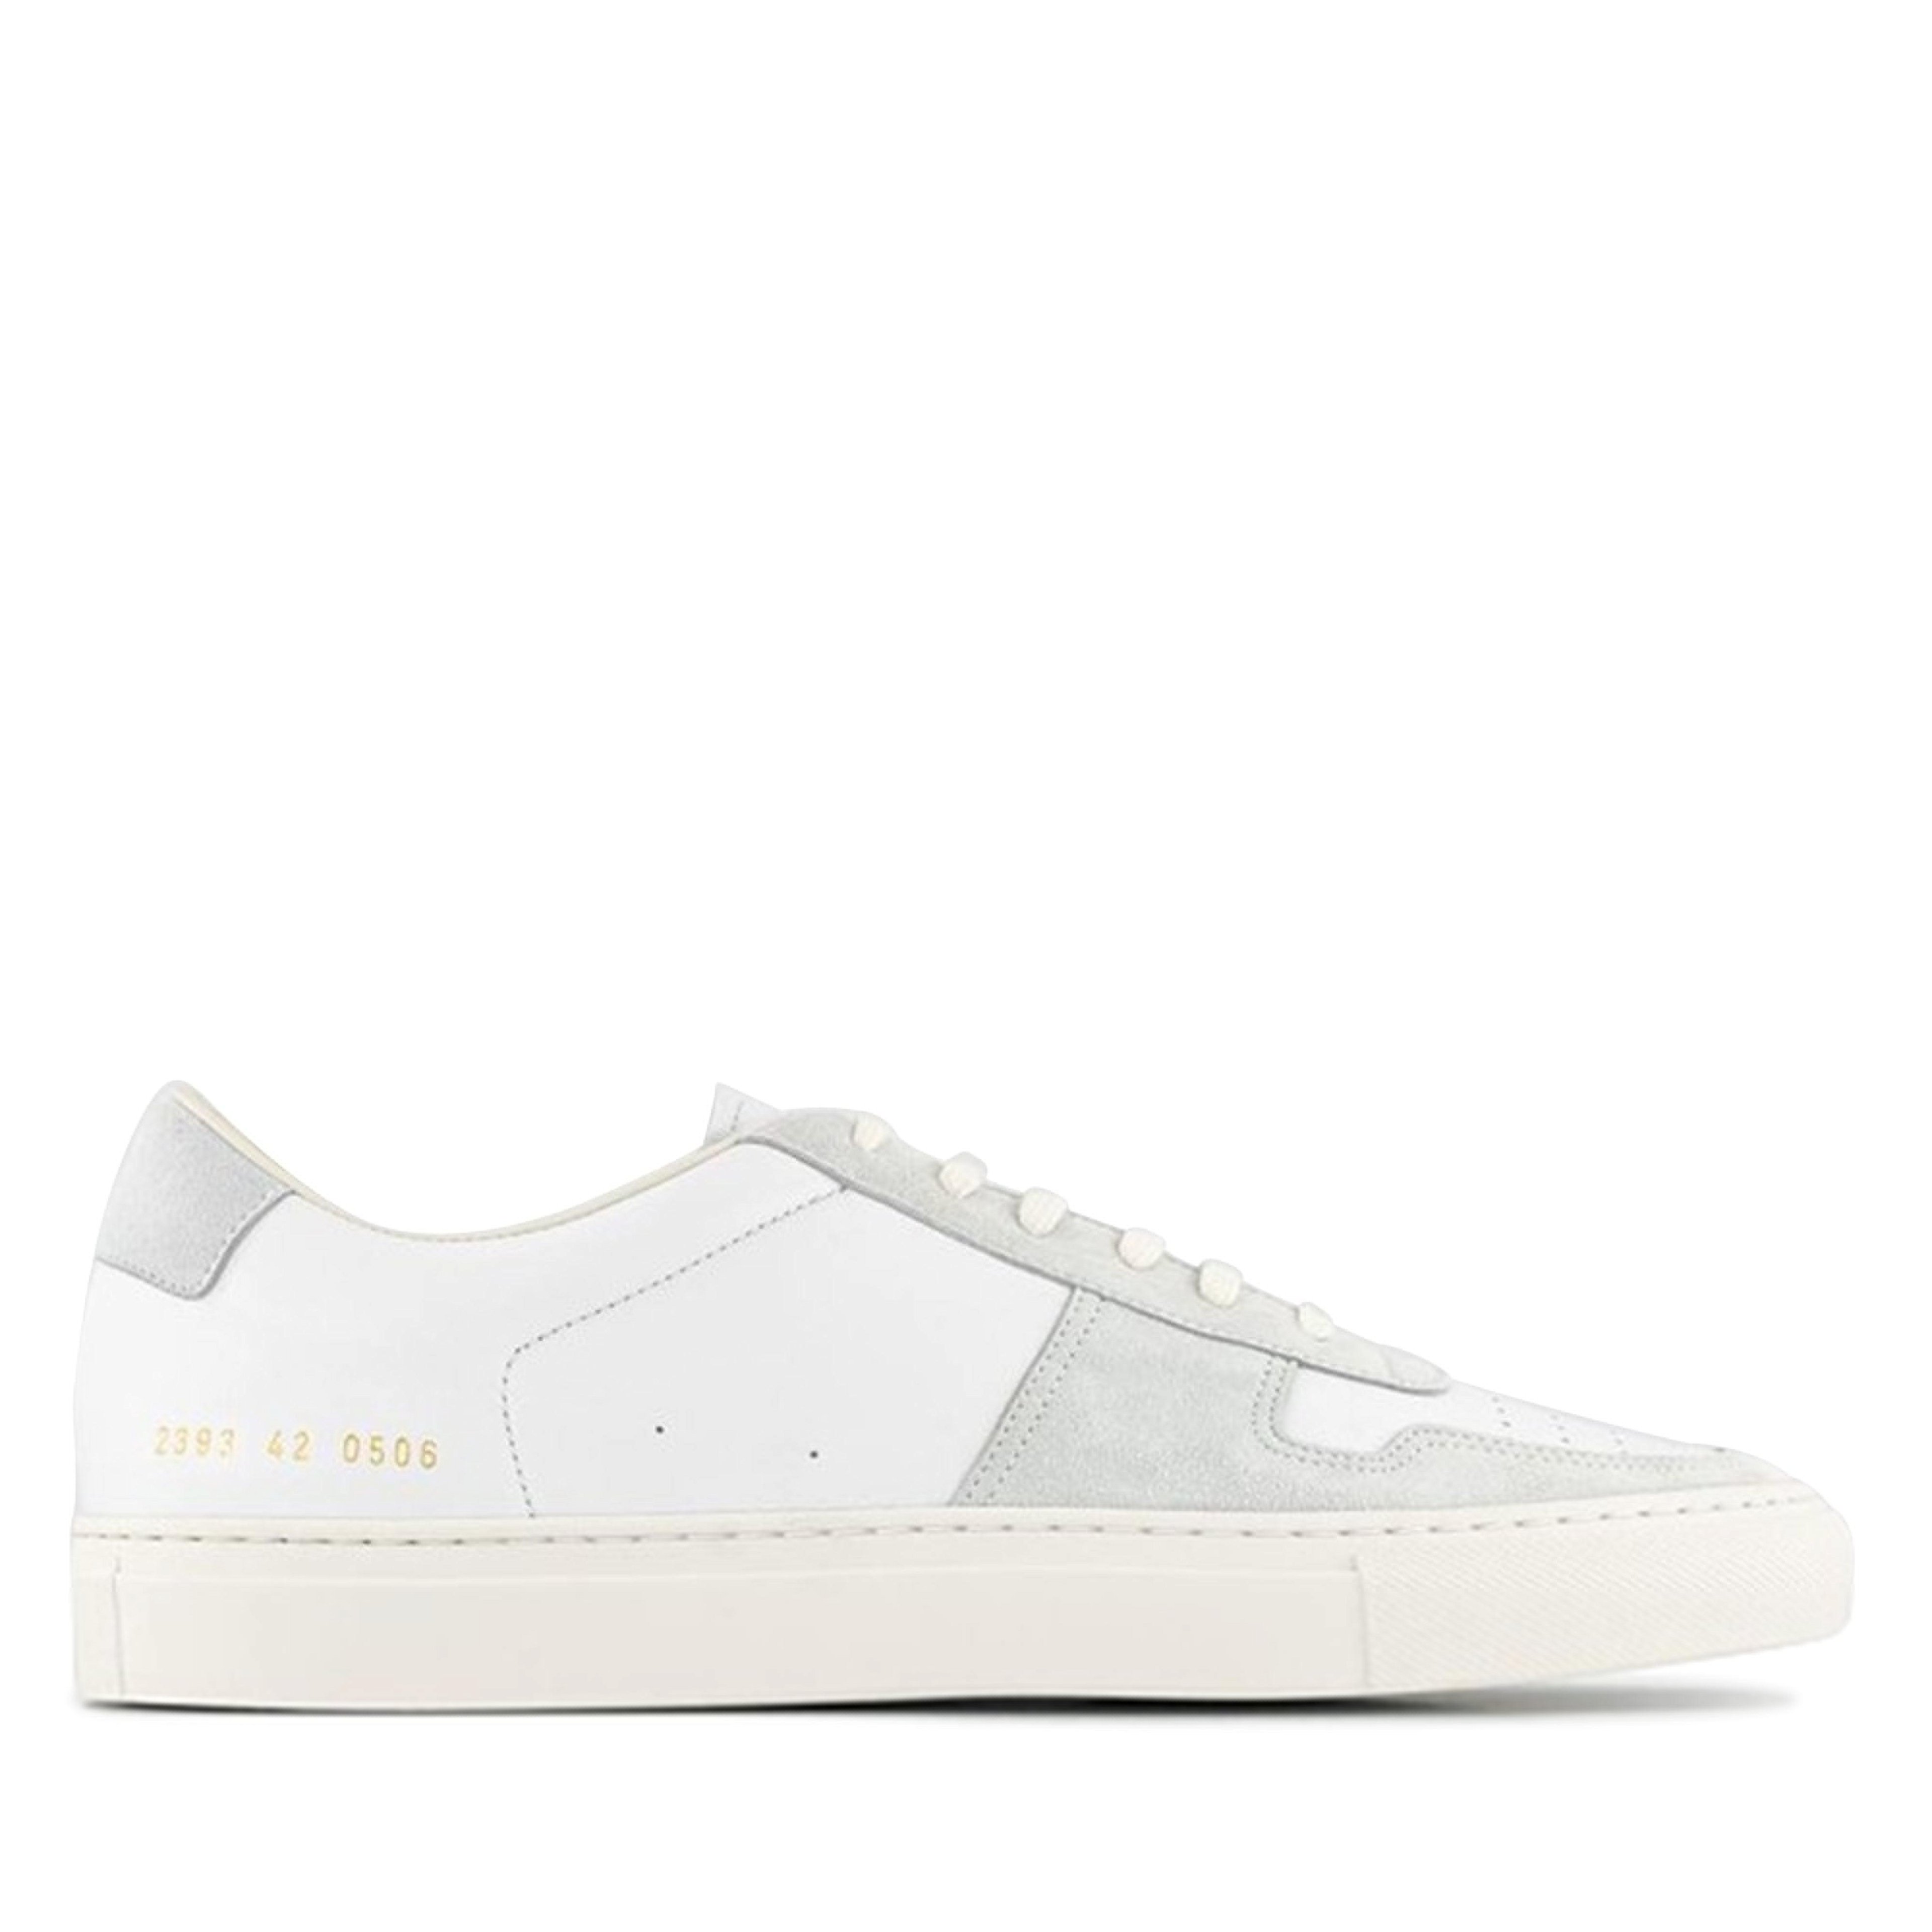 Common Projects - Bball Duo Sneakers - (White) by COMMON PROJECTS